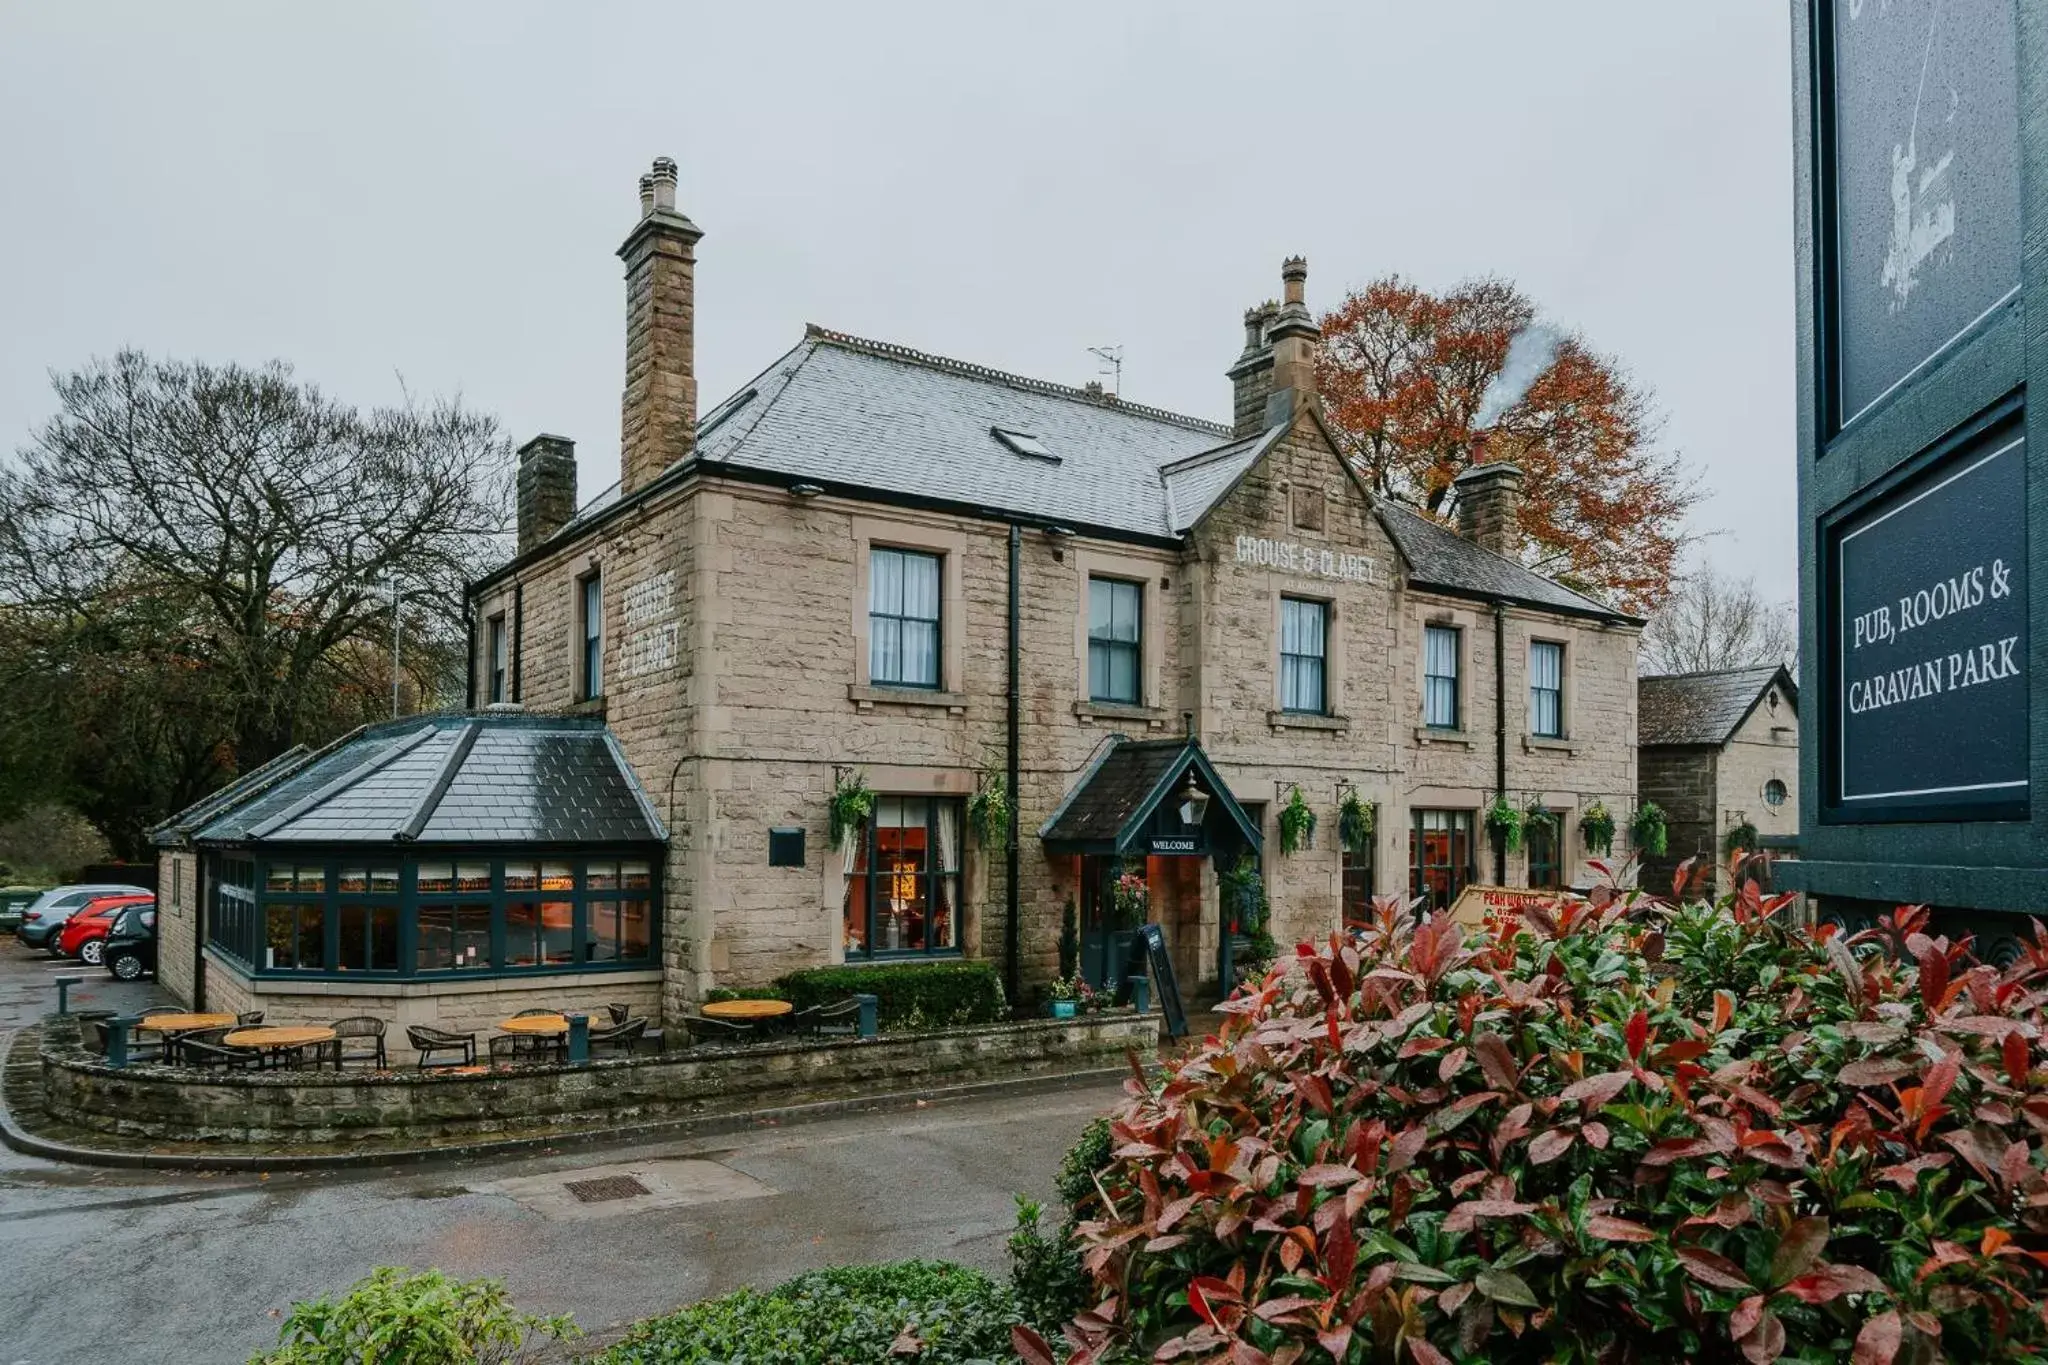 Property Building in Grouse & Claret, Matlock by Marston's Inns